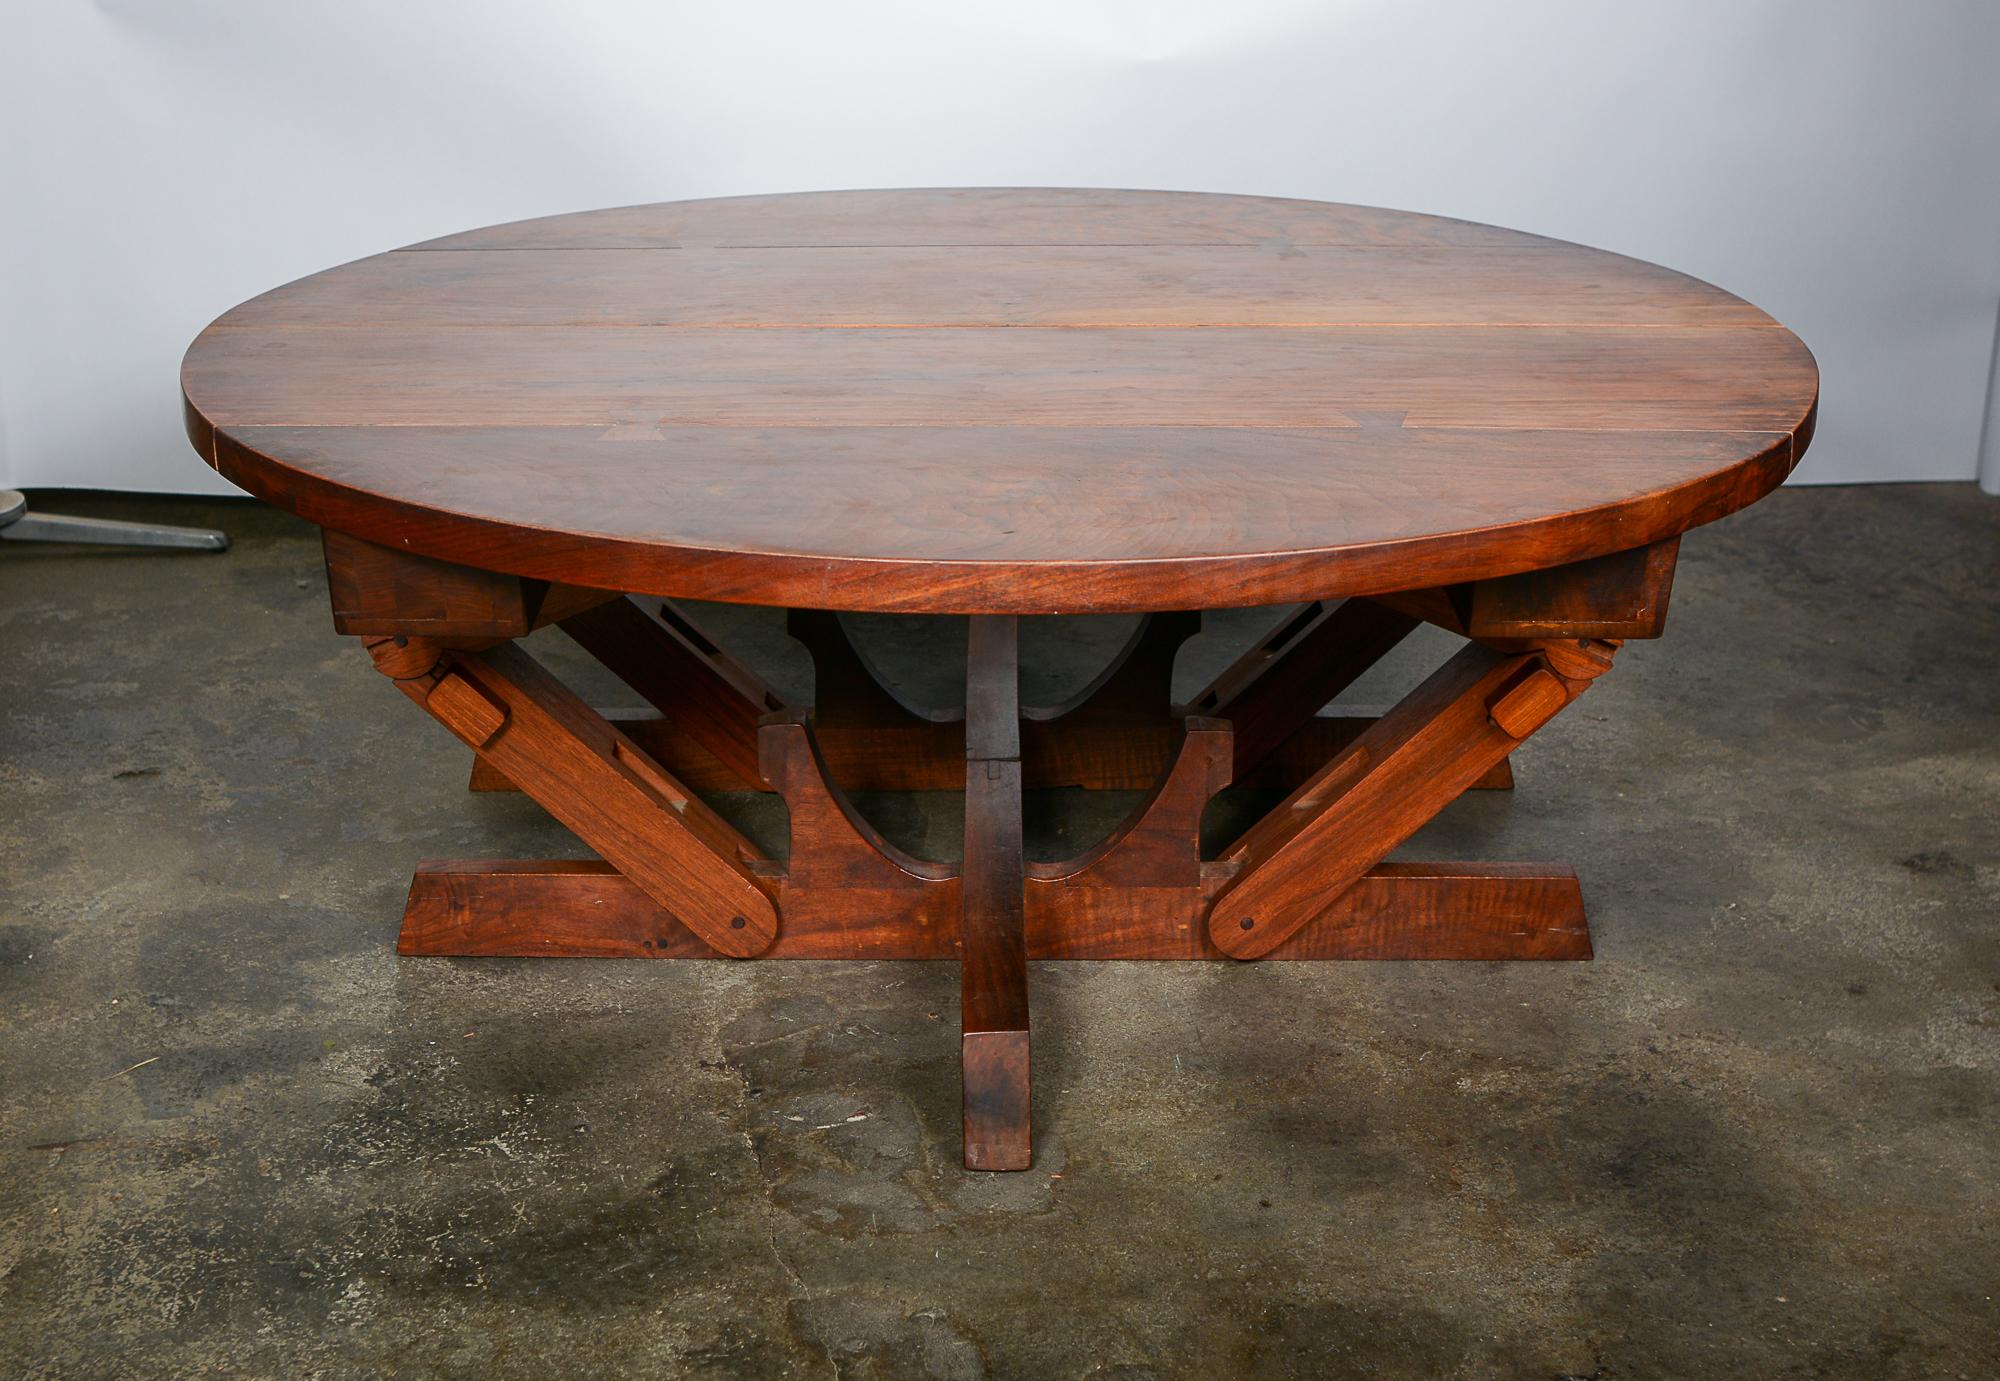 Walnut Dining Table with Four Leaves by Designer and Craftsman Morris Sheppard For Sale 8